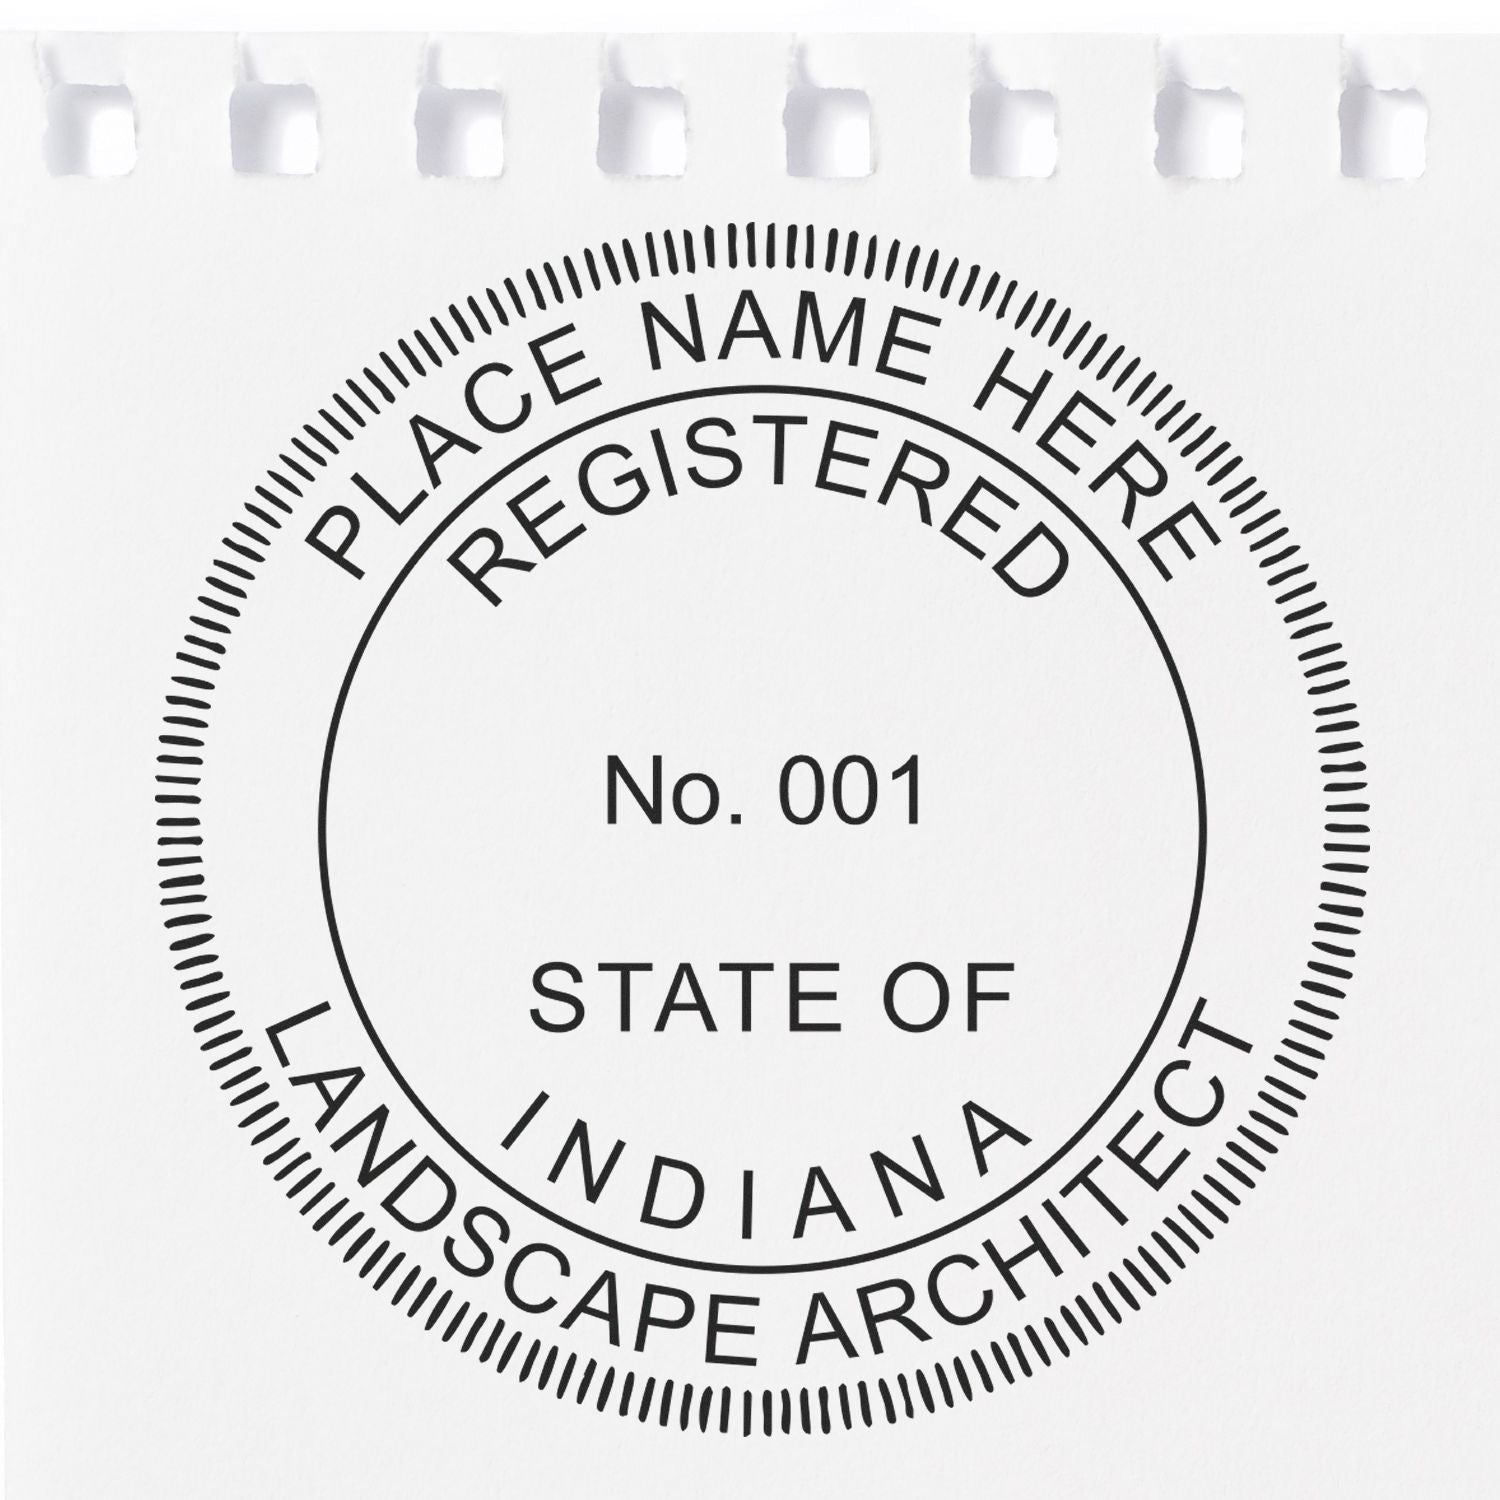 A photograph of the Self-Inking Indiana Landscape Architect Stamp stamp impression reveals a vivid, professional image of the on paper.